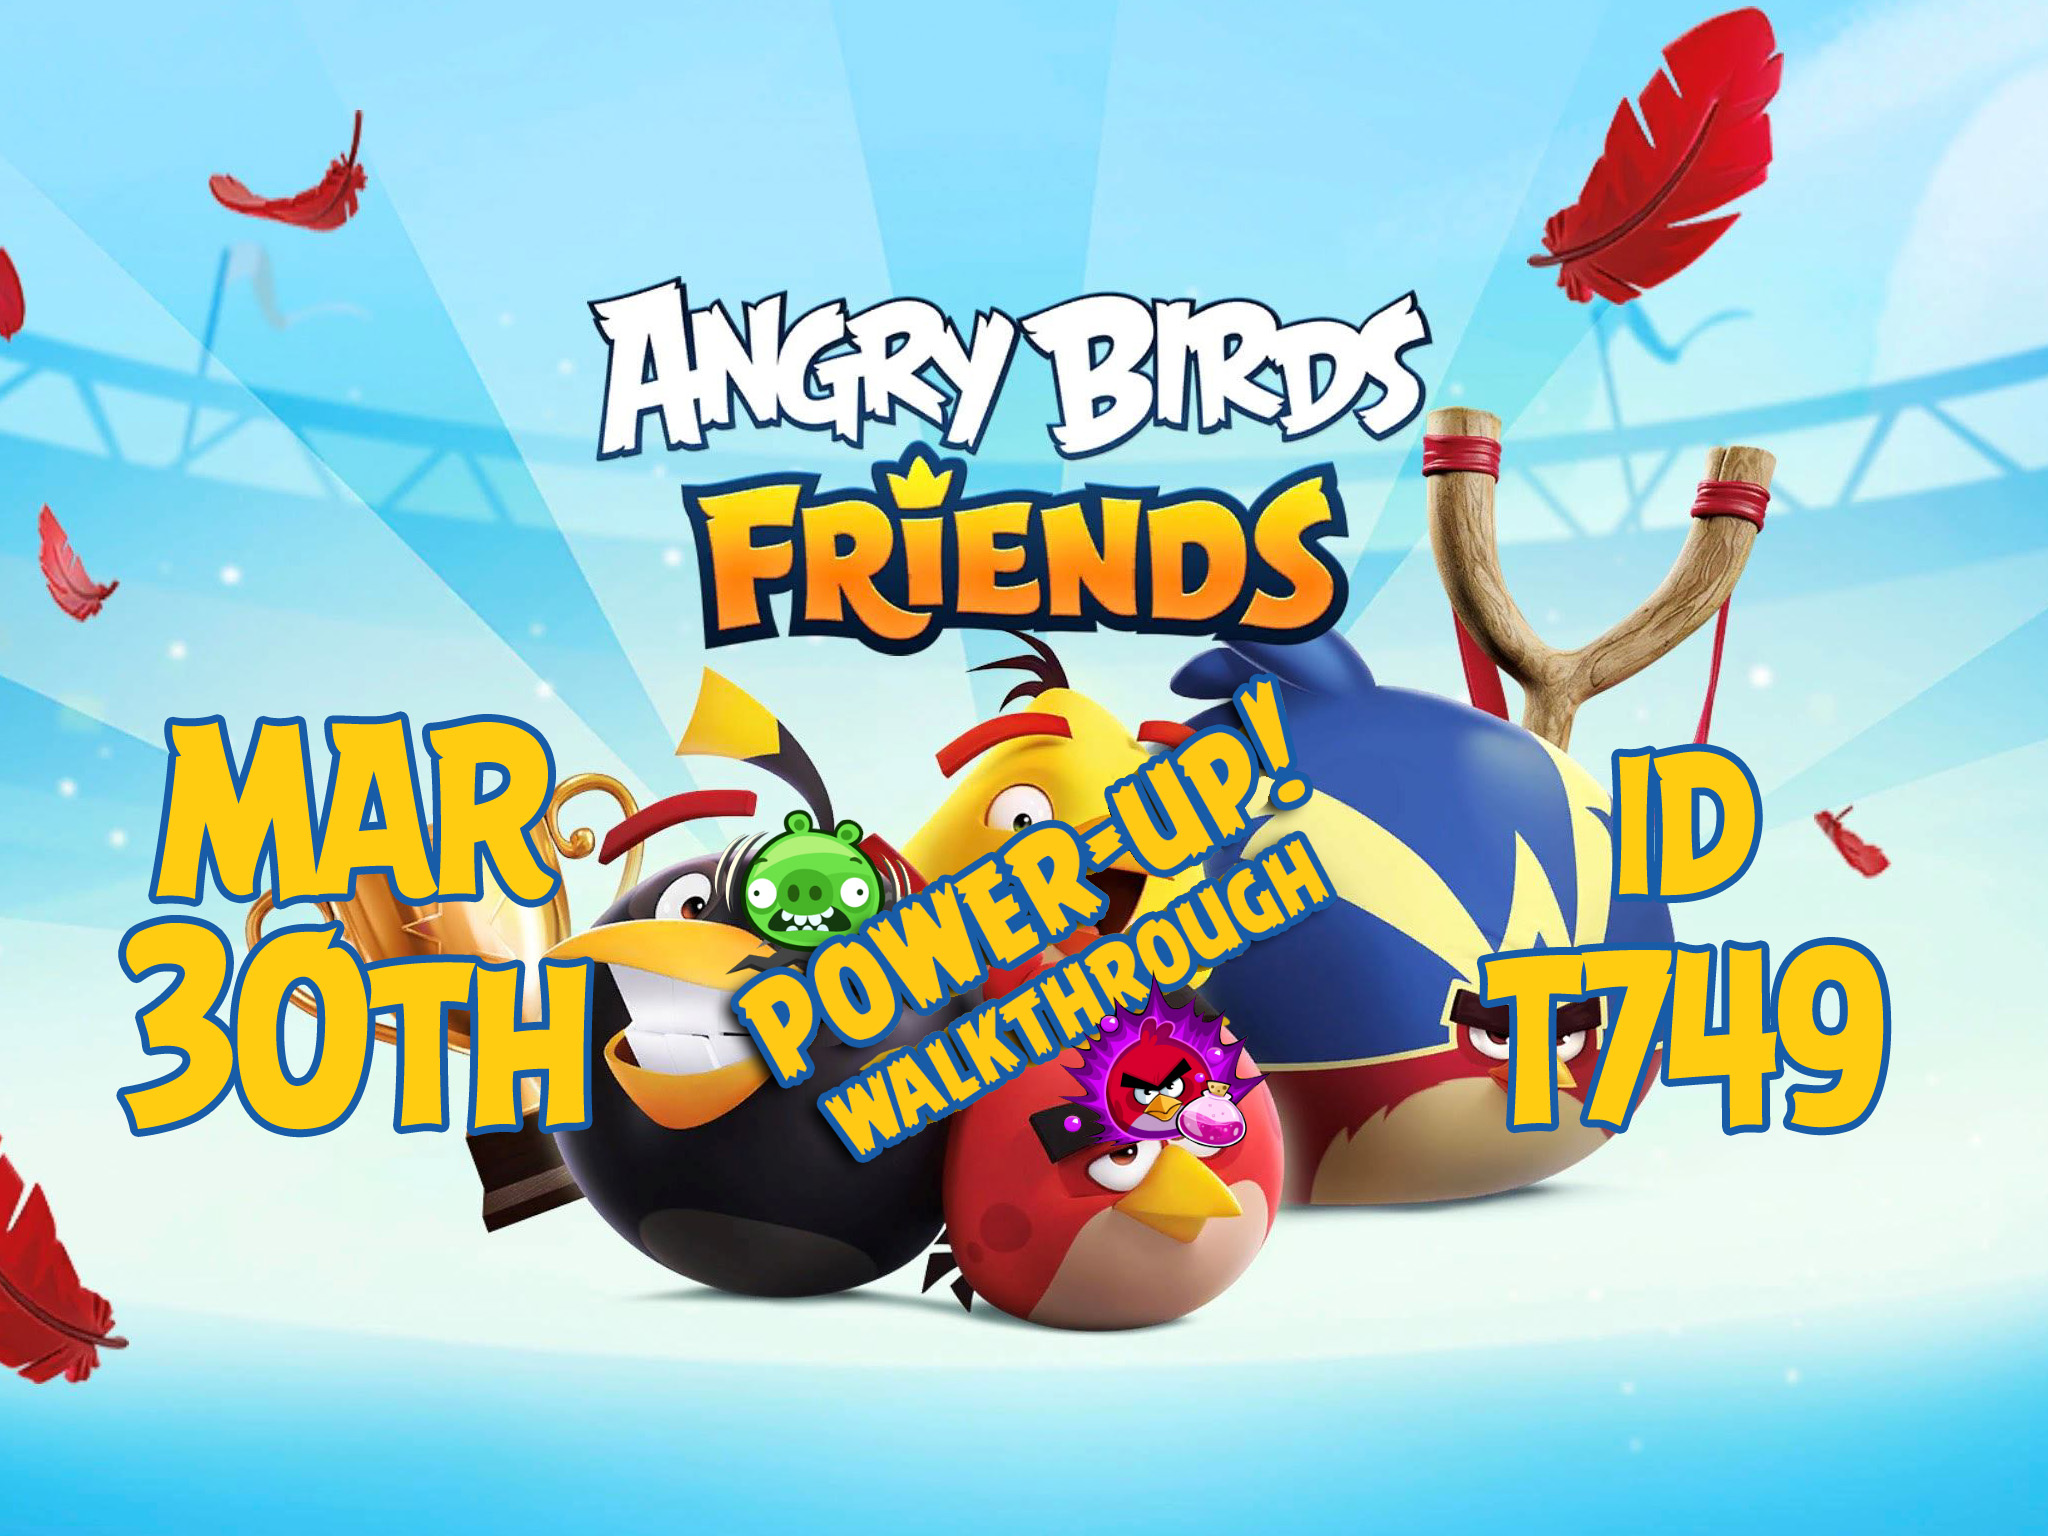 Angry-Birds-Friends-Tournament-T749-Feature-Image-PU